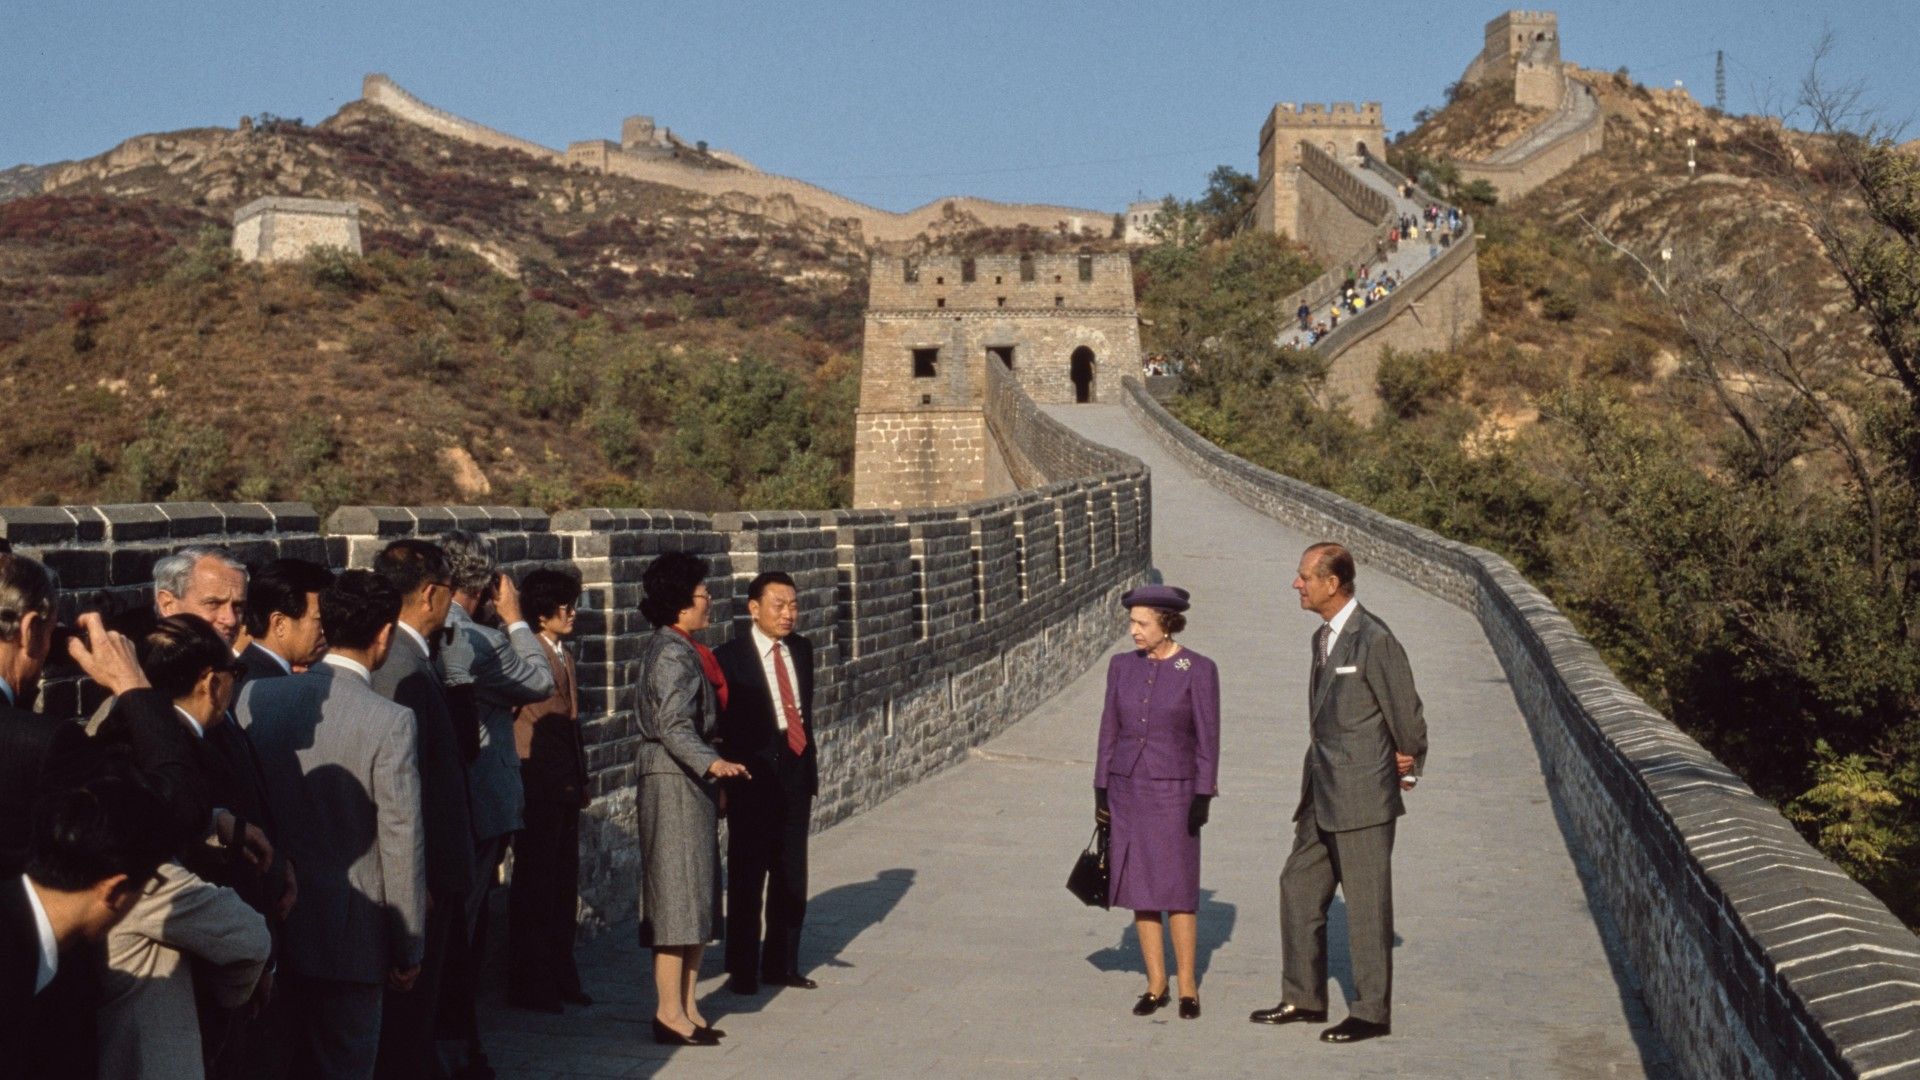 <p>                     Queen Elizabeth II was the very first UK monarch to visit China in 1986, and it was considered to be an important visit in bolstering relations between China and the United Kingdom.                   </p>                                      <p>                     During the trip, the Queen and Prince Philip were shown numerous important sites in China, including the Great Wall, as well as the Forbidden City in Beijing. She also visited the Terracotta Warriors in Xi'an. This remains the only visit to China from a serving British monarch; Charles and William have both visited the country previously, but not (of course) as the UK monarch.                   </p>